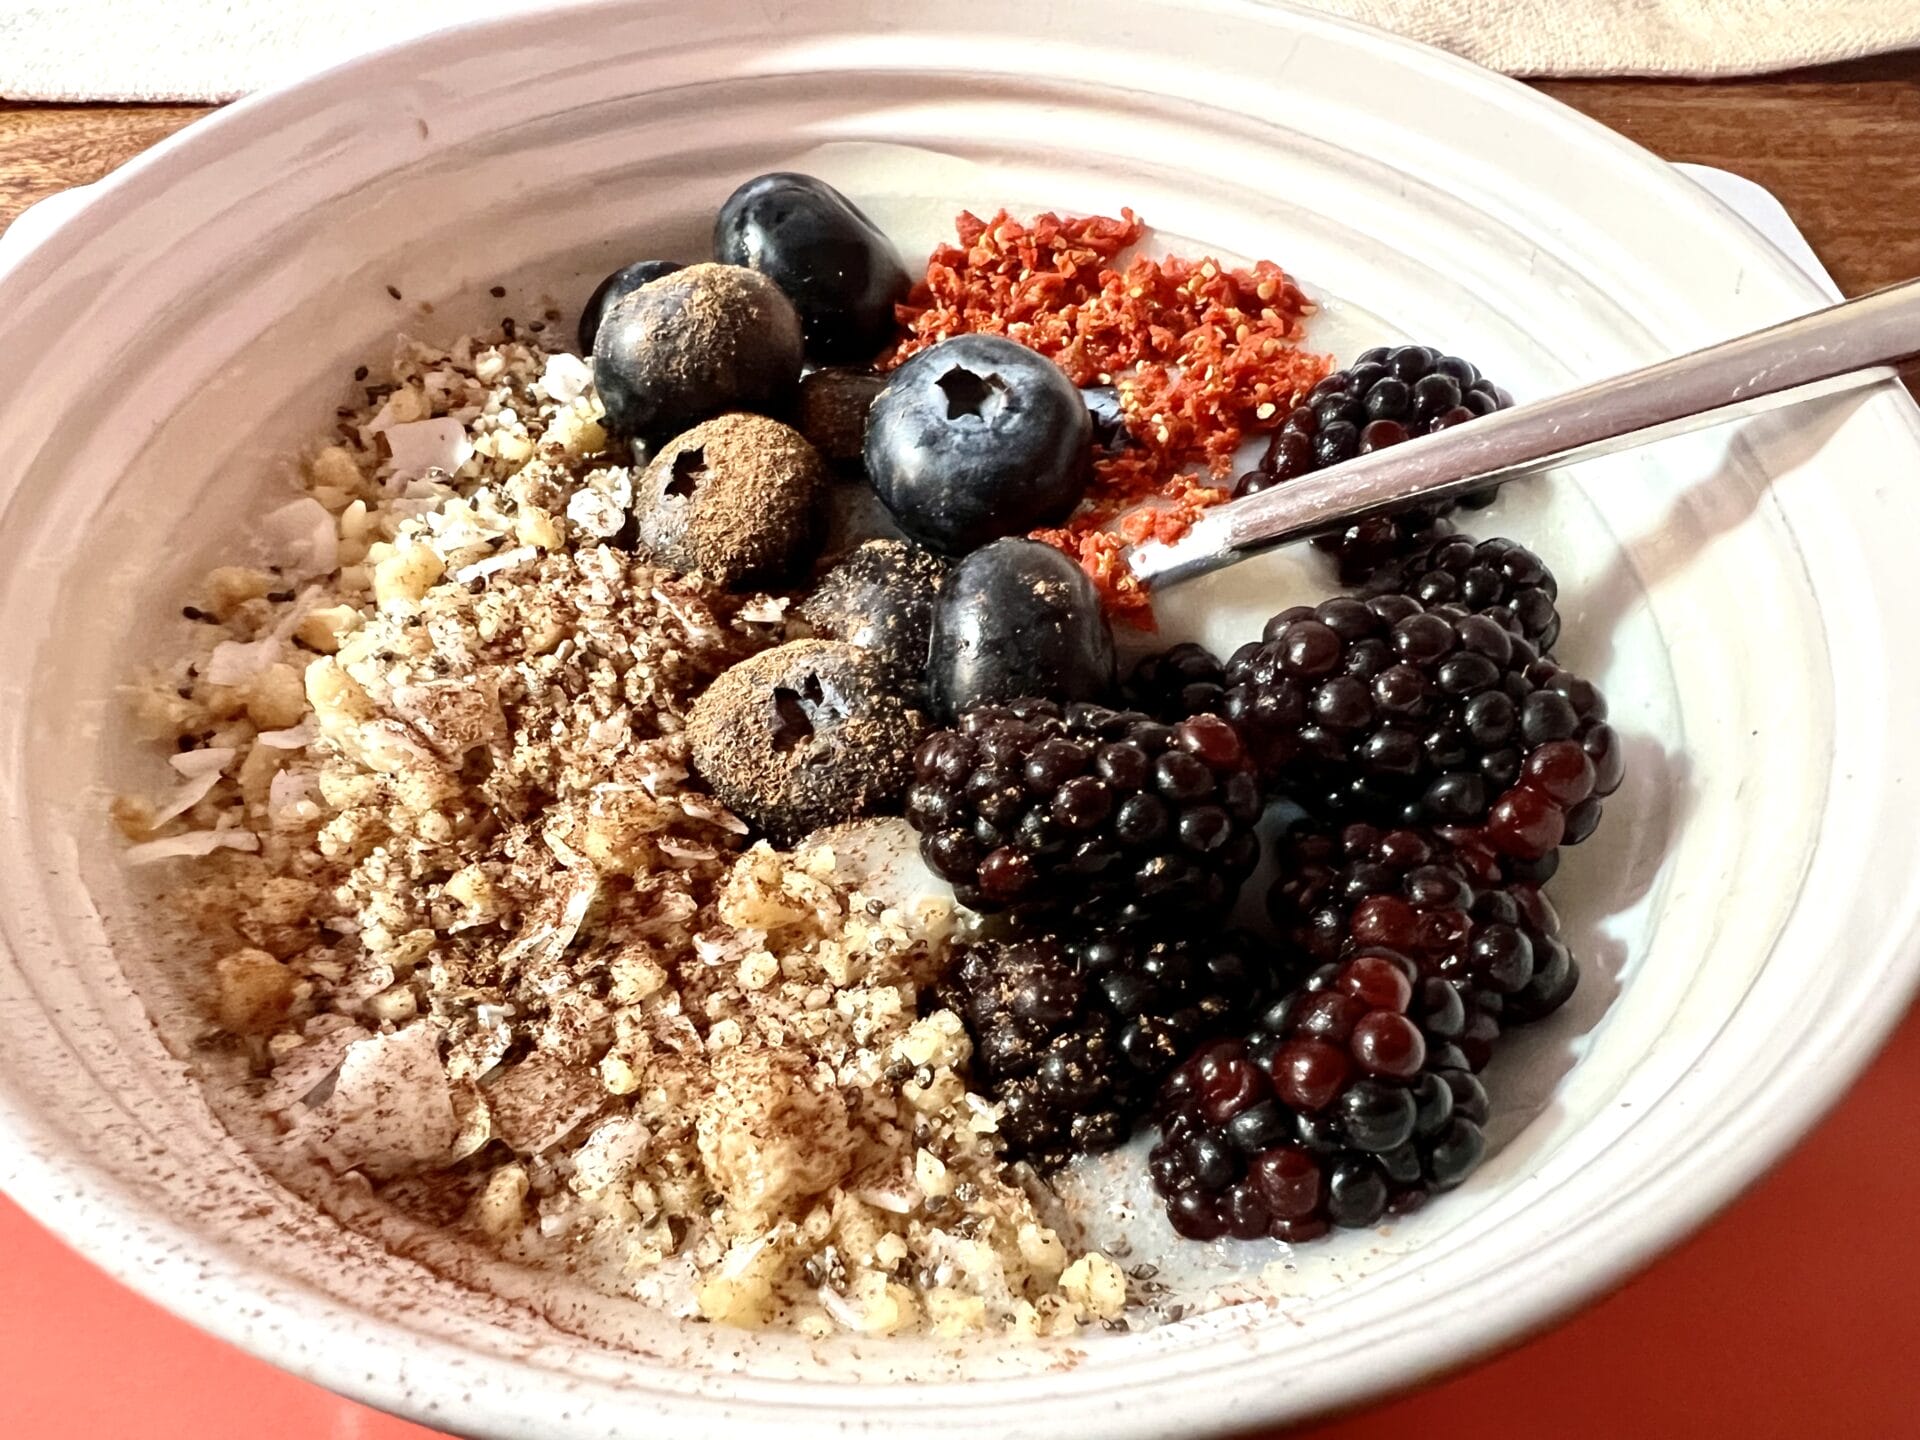 A go-to breakfast bowl with oatmeal, berries, and granola.